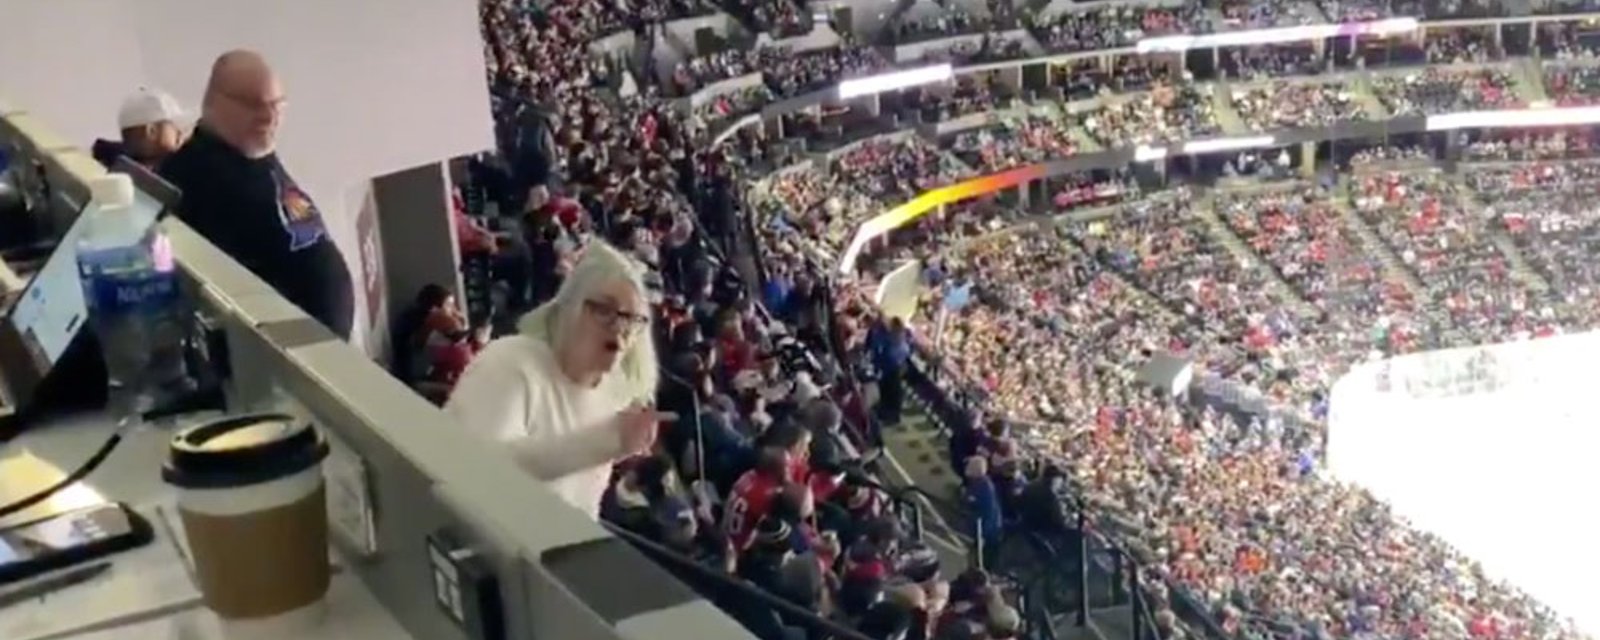 Two fans get in vulgar screaming match in front of commentators’ booth in Colorado 